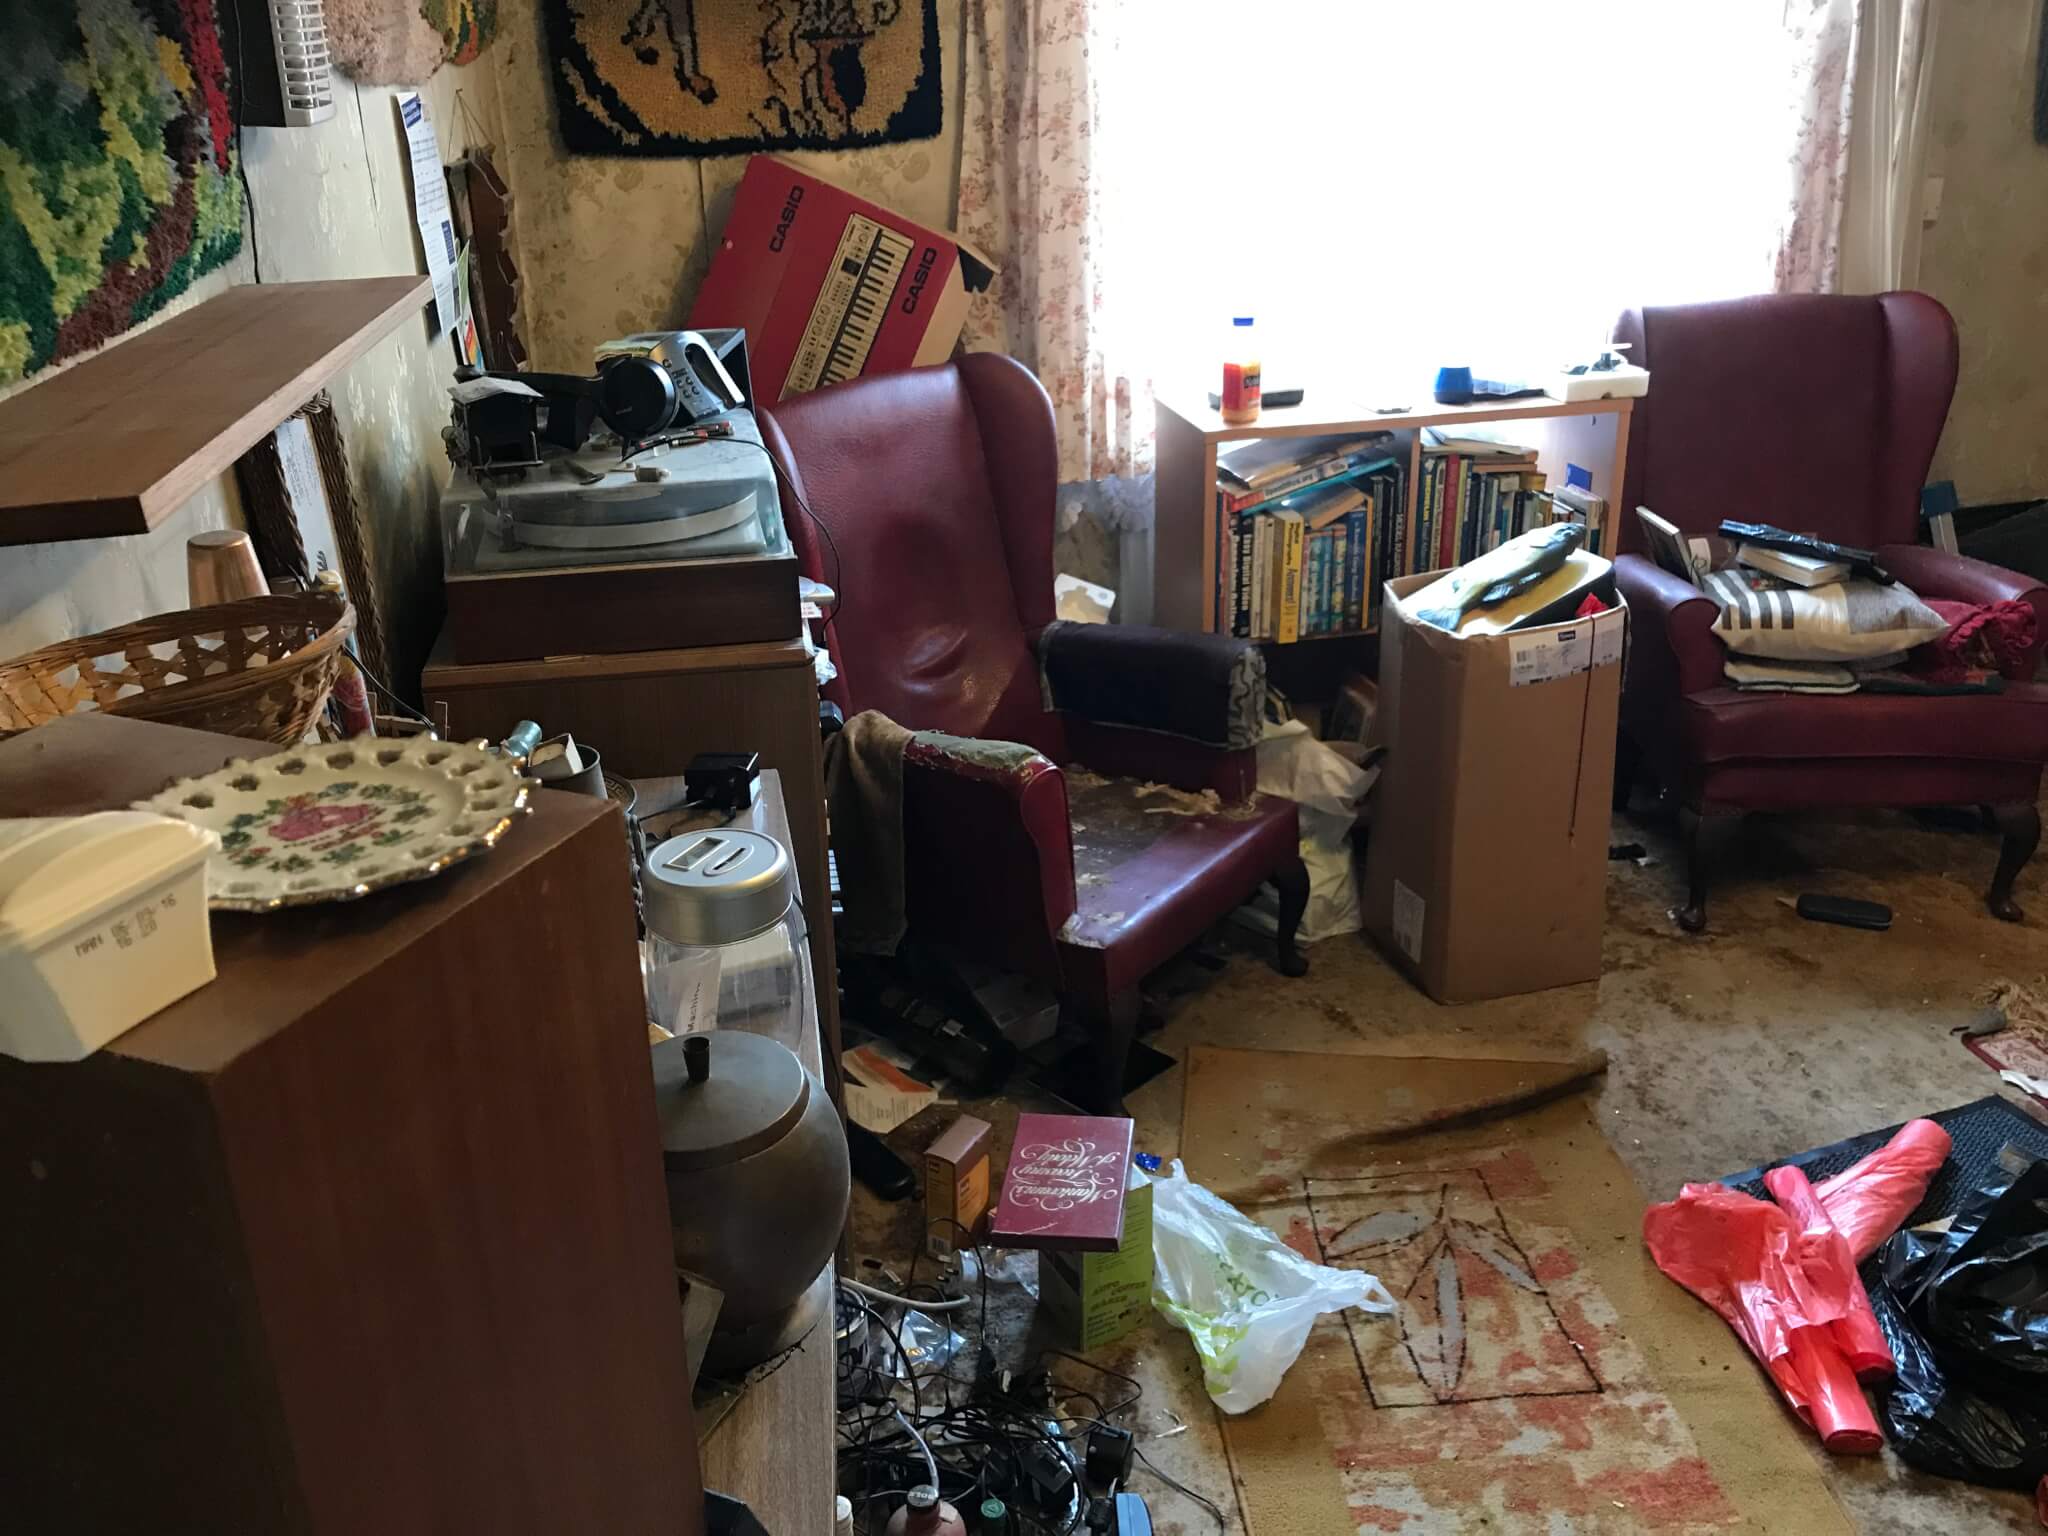 Living room with broken red chair and rubbish on the floor